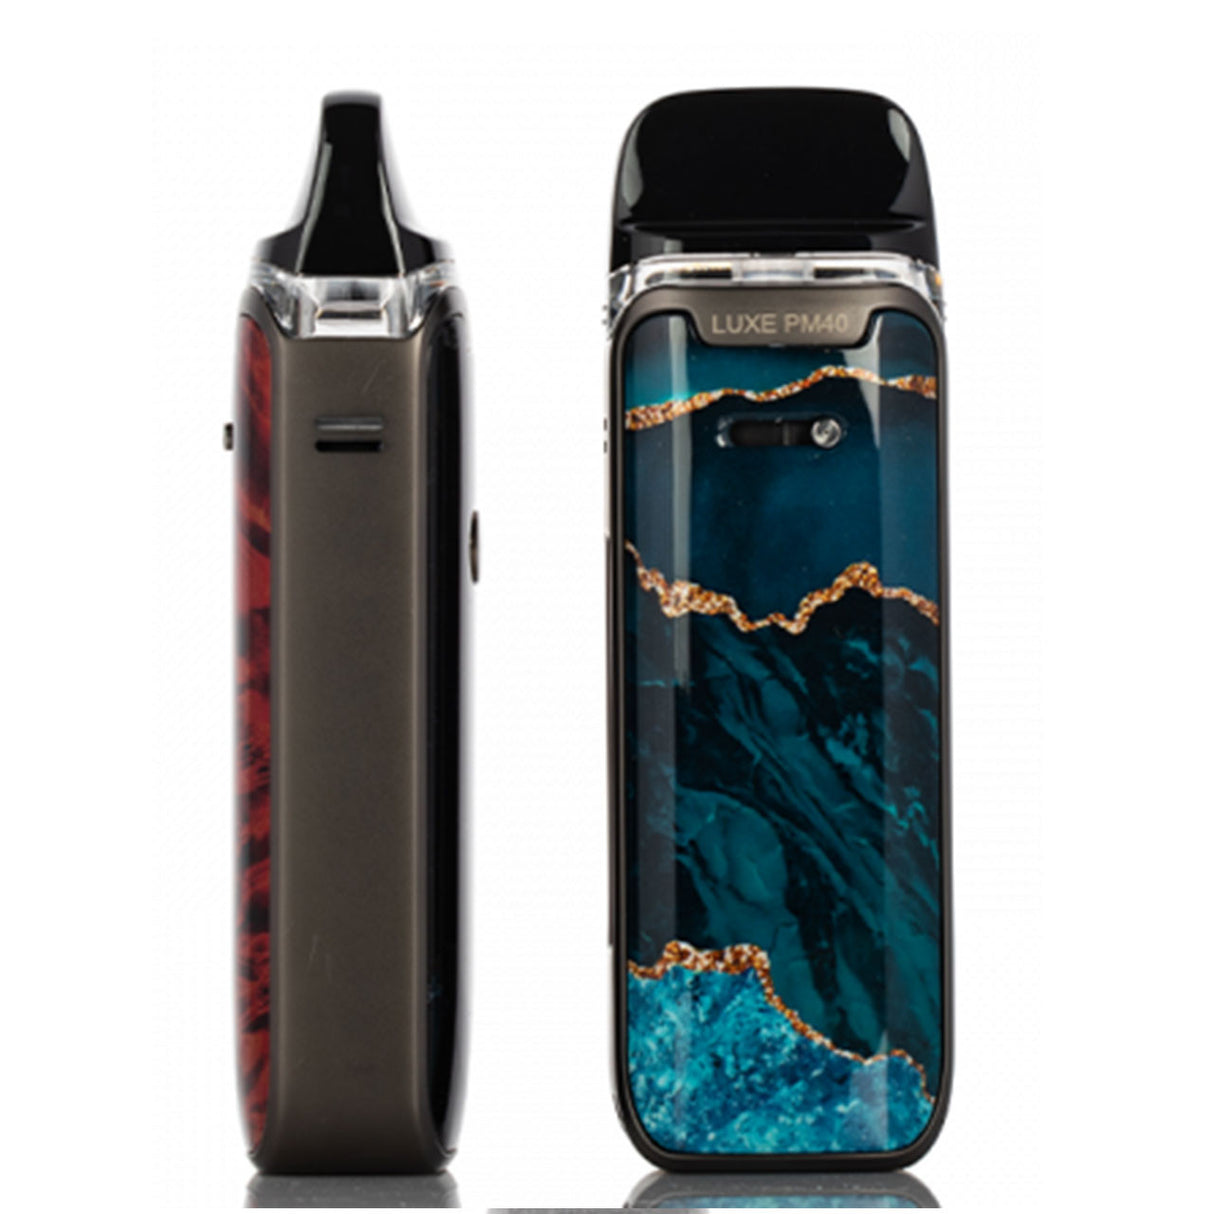 Vaporesso Luxe PM40 40 Watt Vaping device with GTX Mesh Coil and Variable Voltage Settings